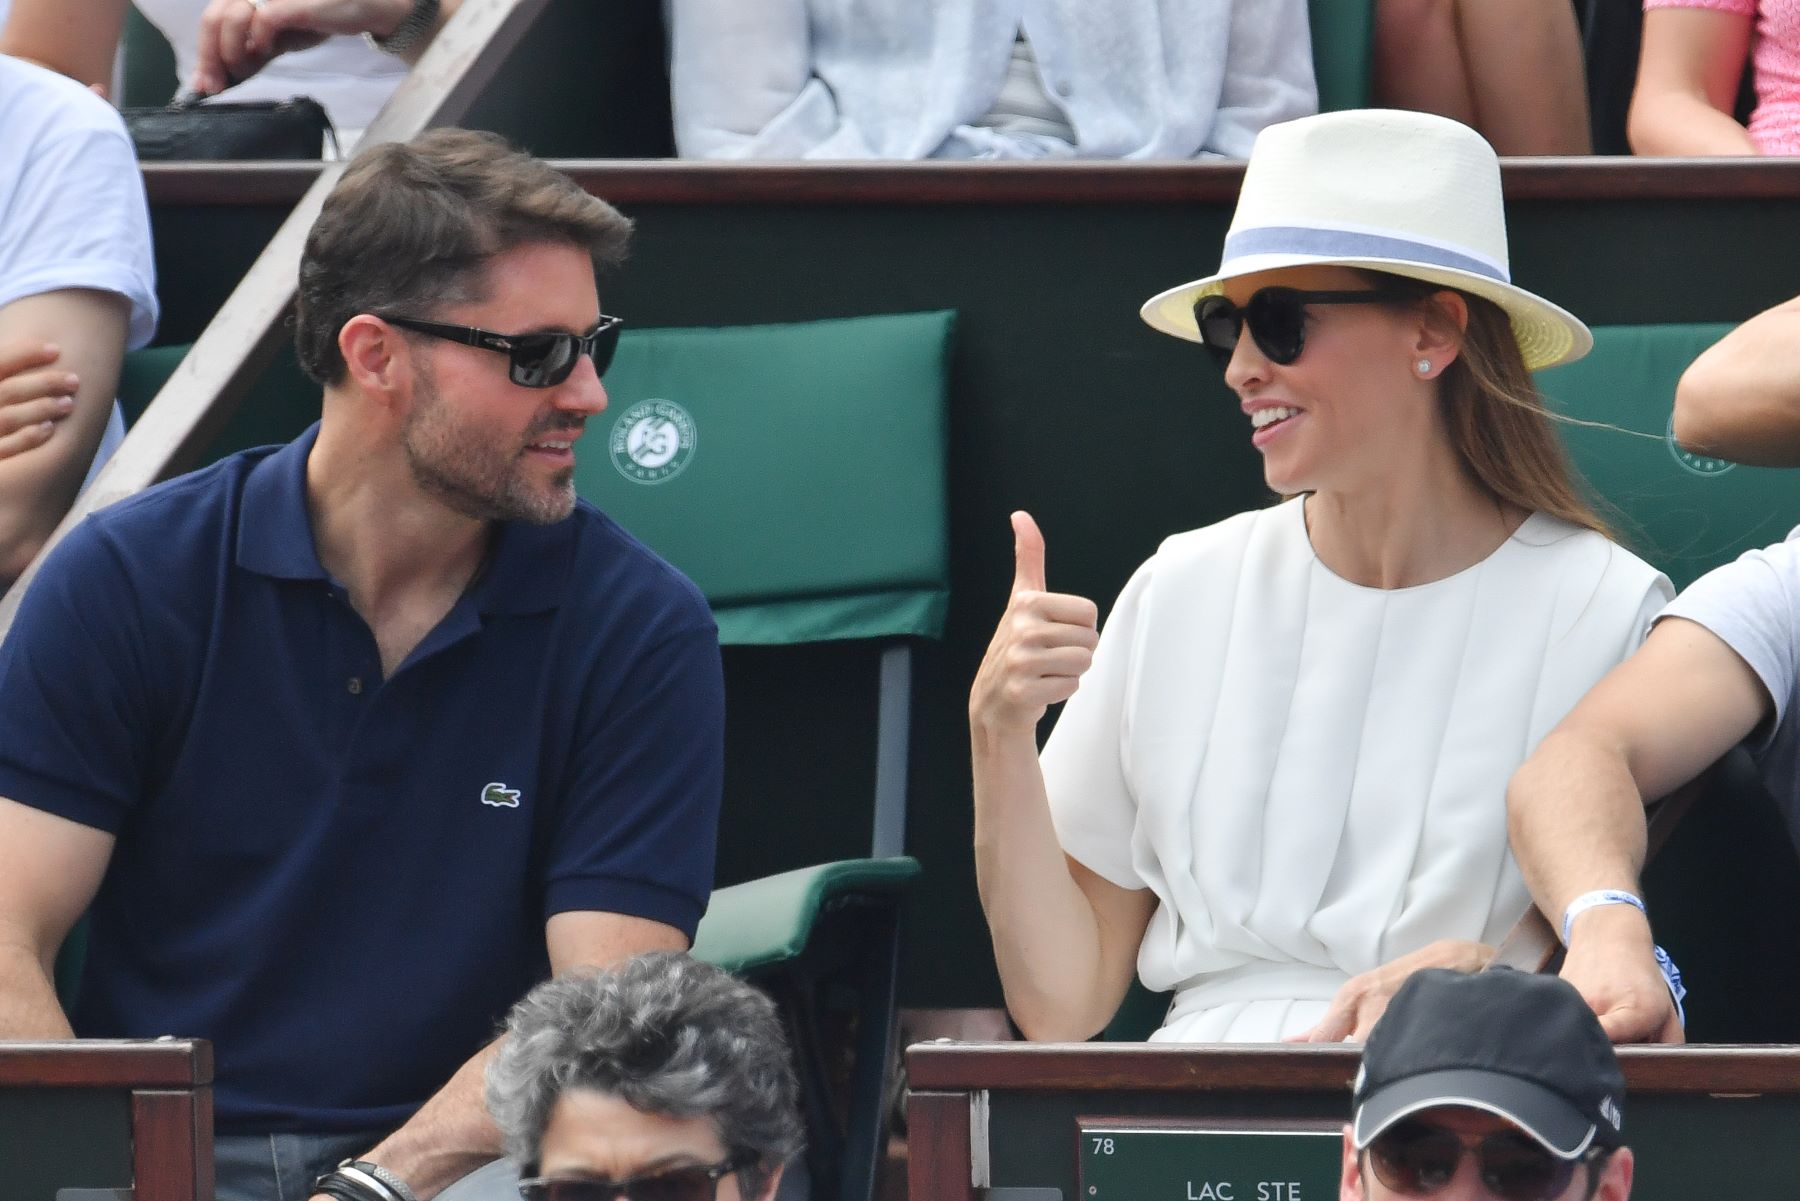 Philip Schneider and Hilary Swank attending the Women's Final of the 2018 French Open in Paris, France